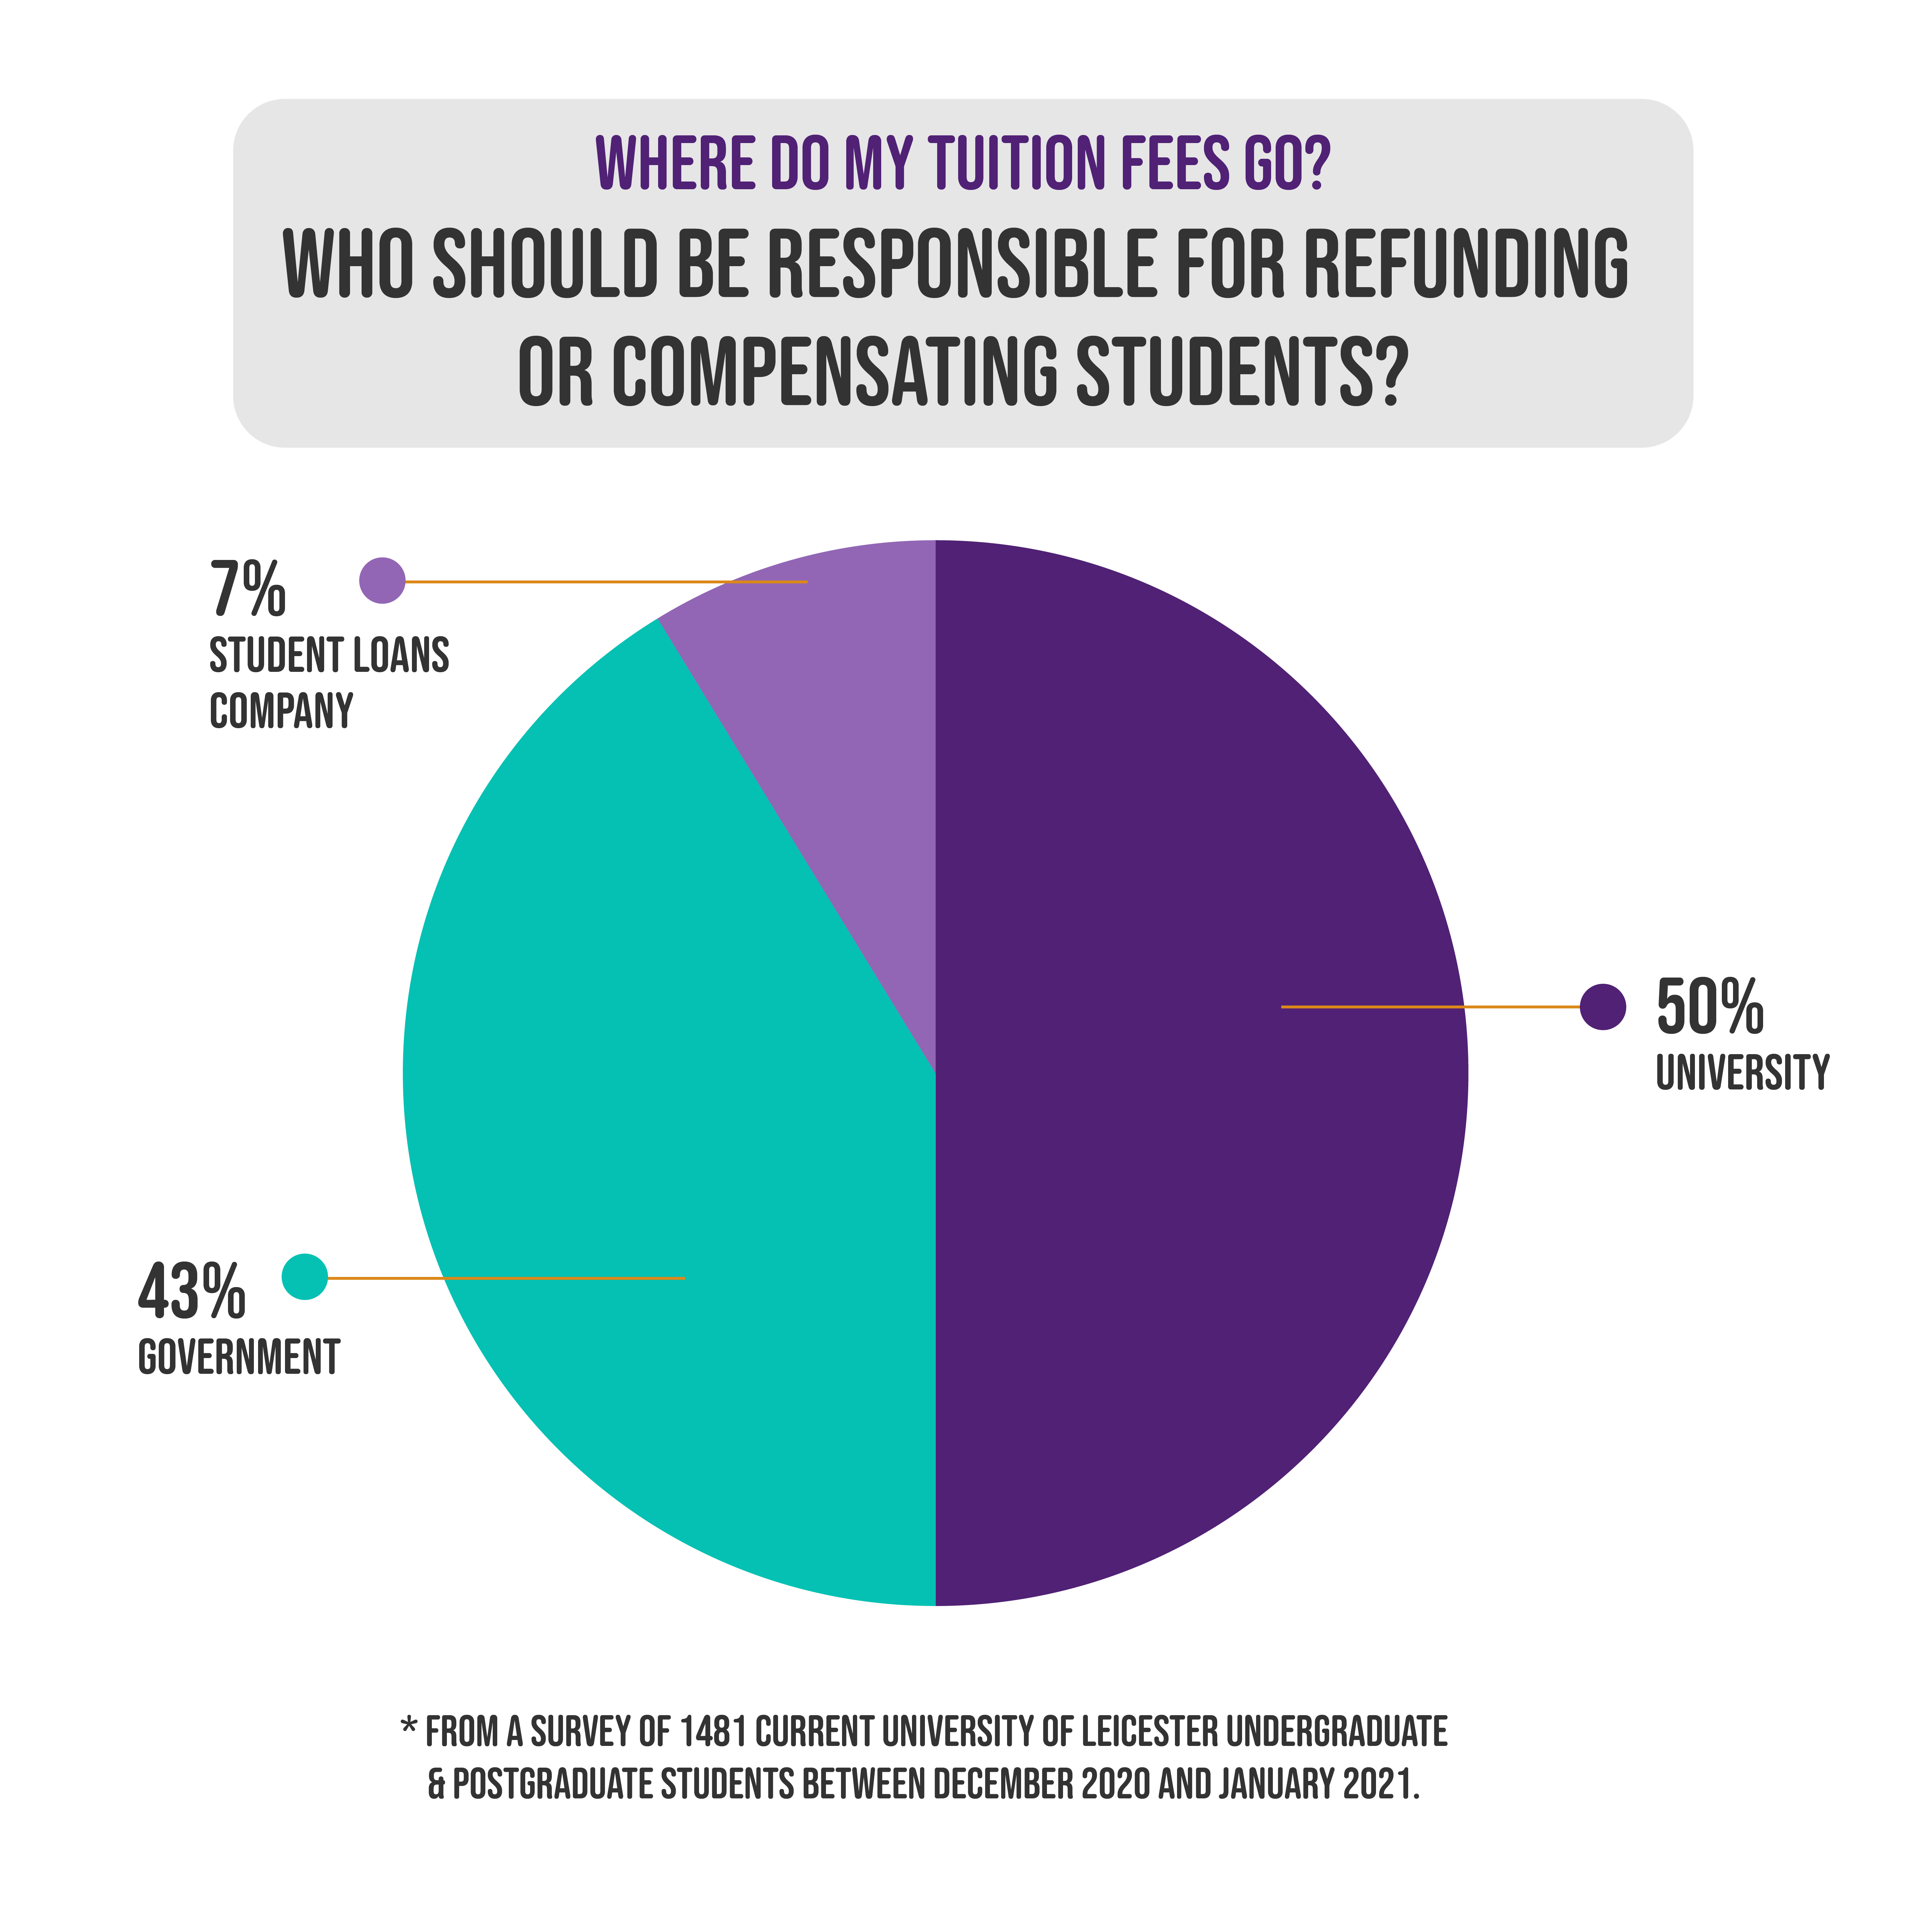 Pie chart showing 'Who should be responsible for refunding or compensating students?' according to the survey. 50% university, 7% student loans company, 43% government